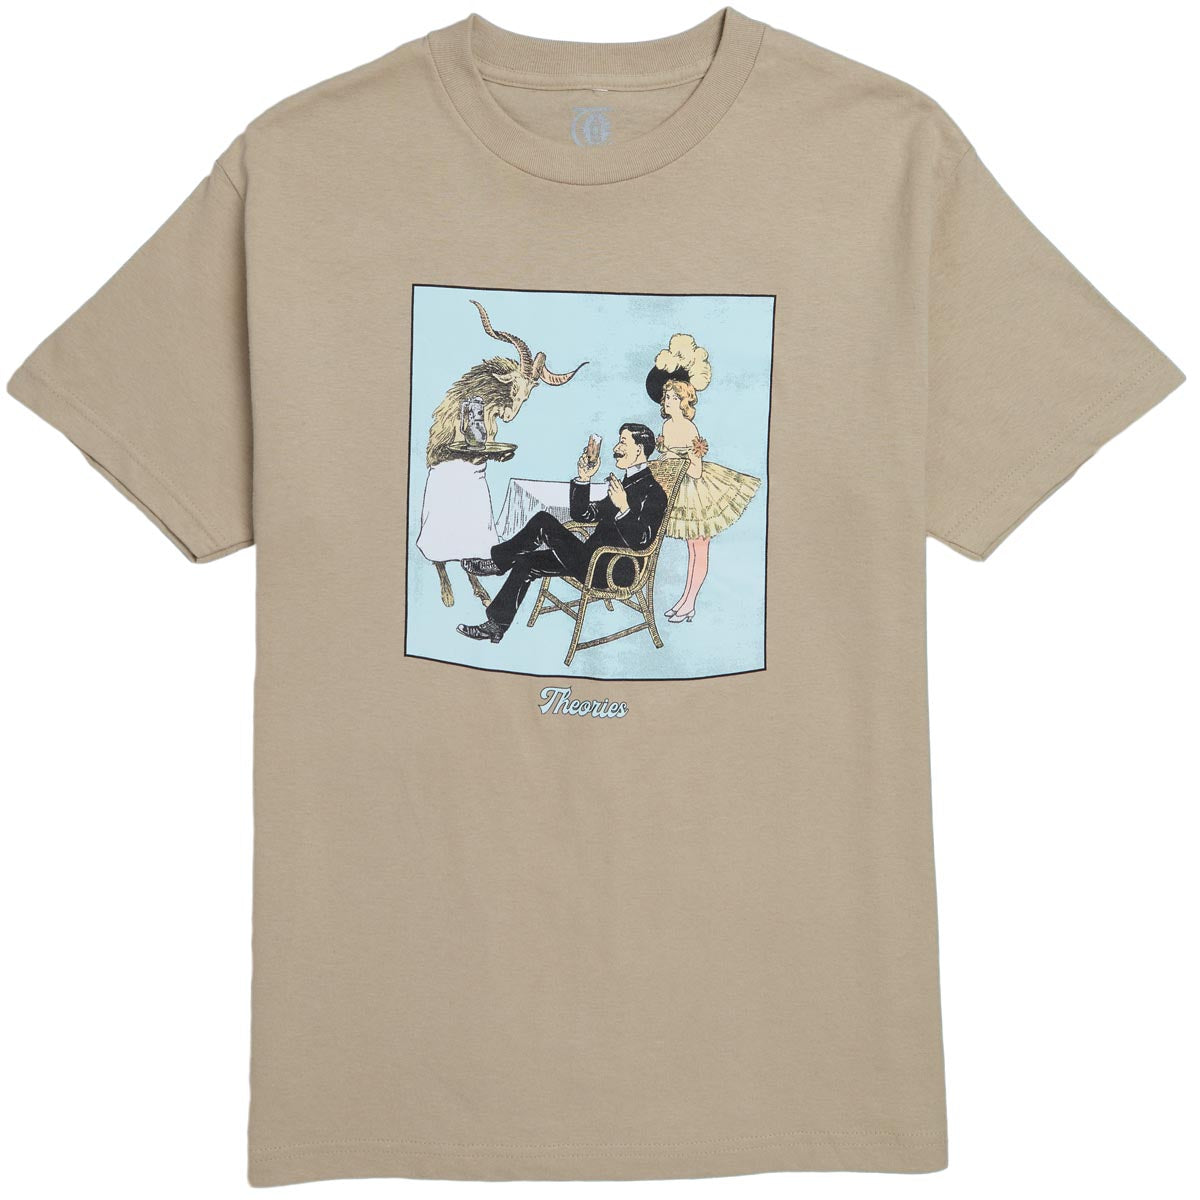 Theories Brewing Co T-Shirt - Sand image 1